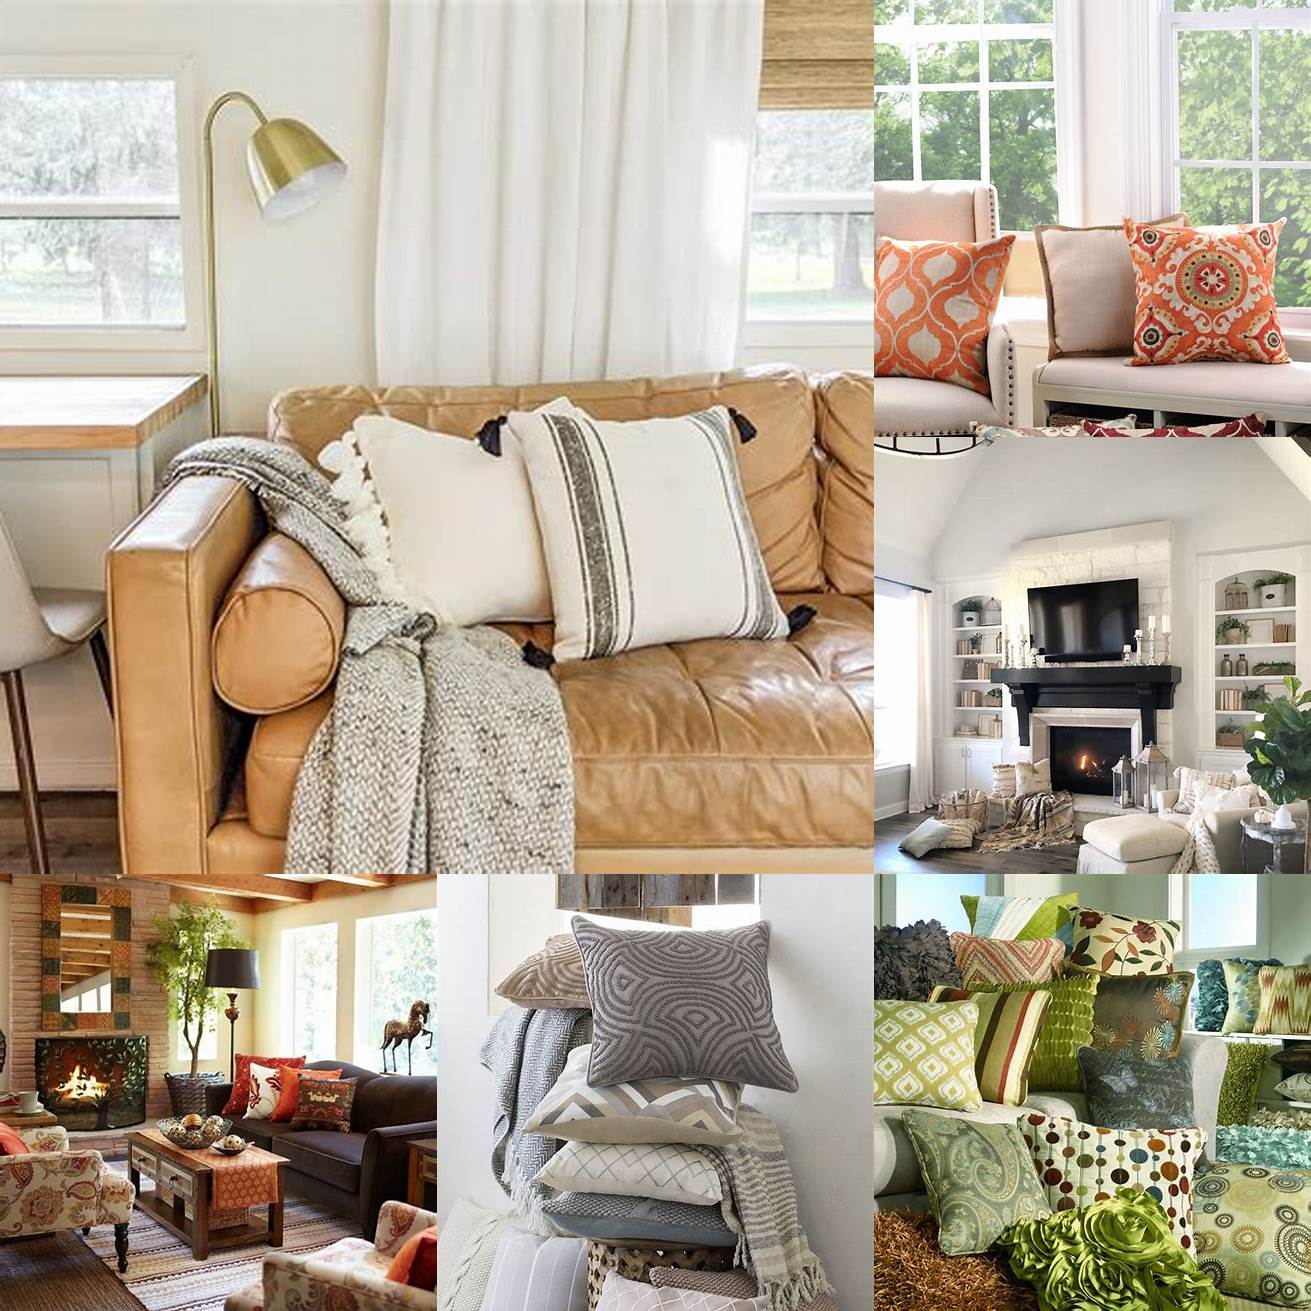 Add decorative pillows or throws in muted colors to create a cozy and inviting atmosphere